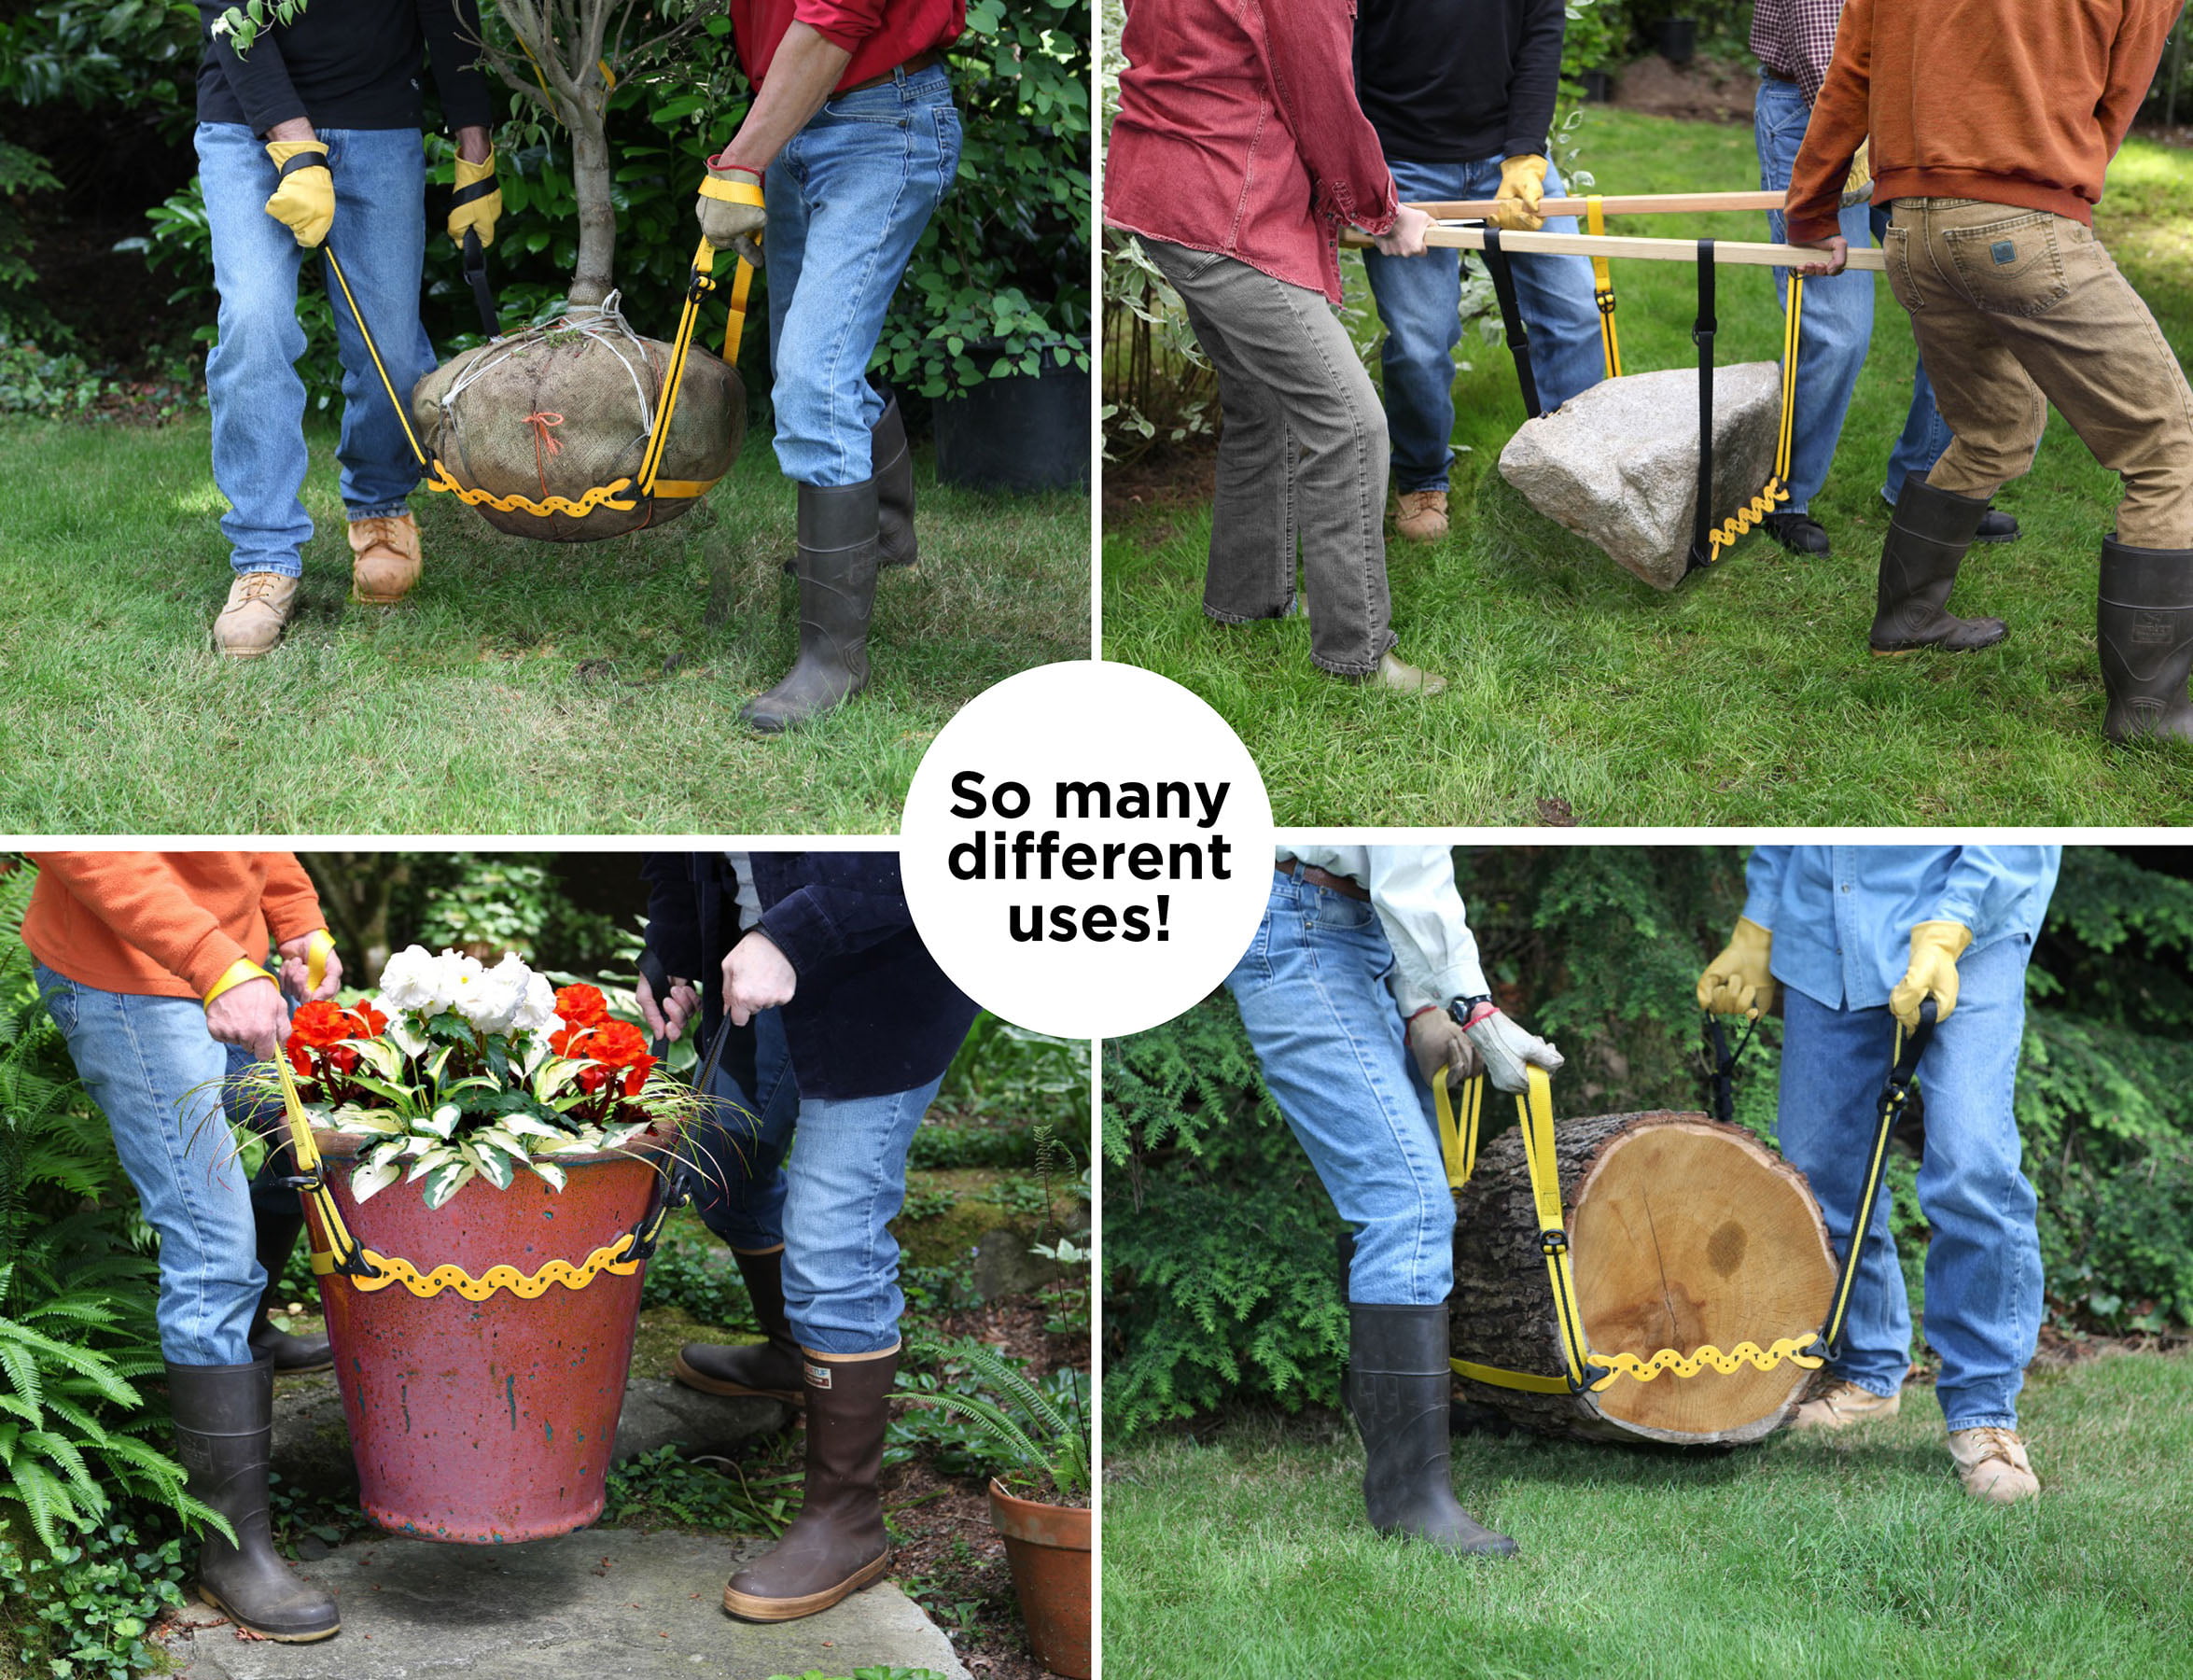 Garden Flower Pots Trees Ideal for Professional Landscapers 350 Pound Gardening and Heavy Lifting Tool Planters A Plant Caddy Alternative ProLifter Rocks Perfect for Heavy Potted Plants